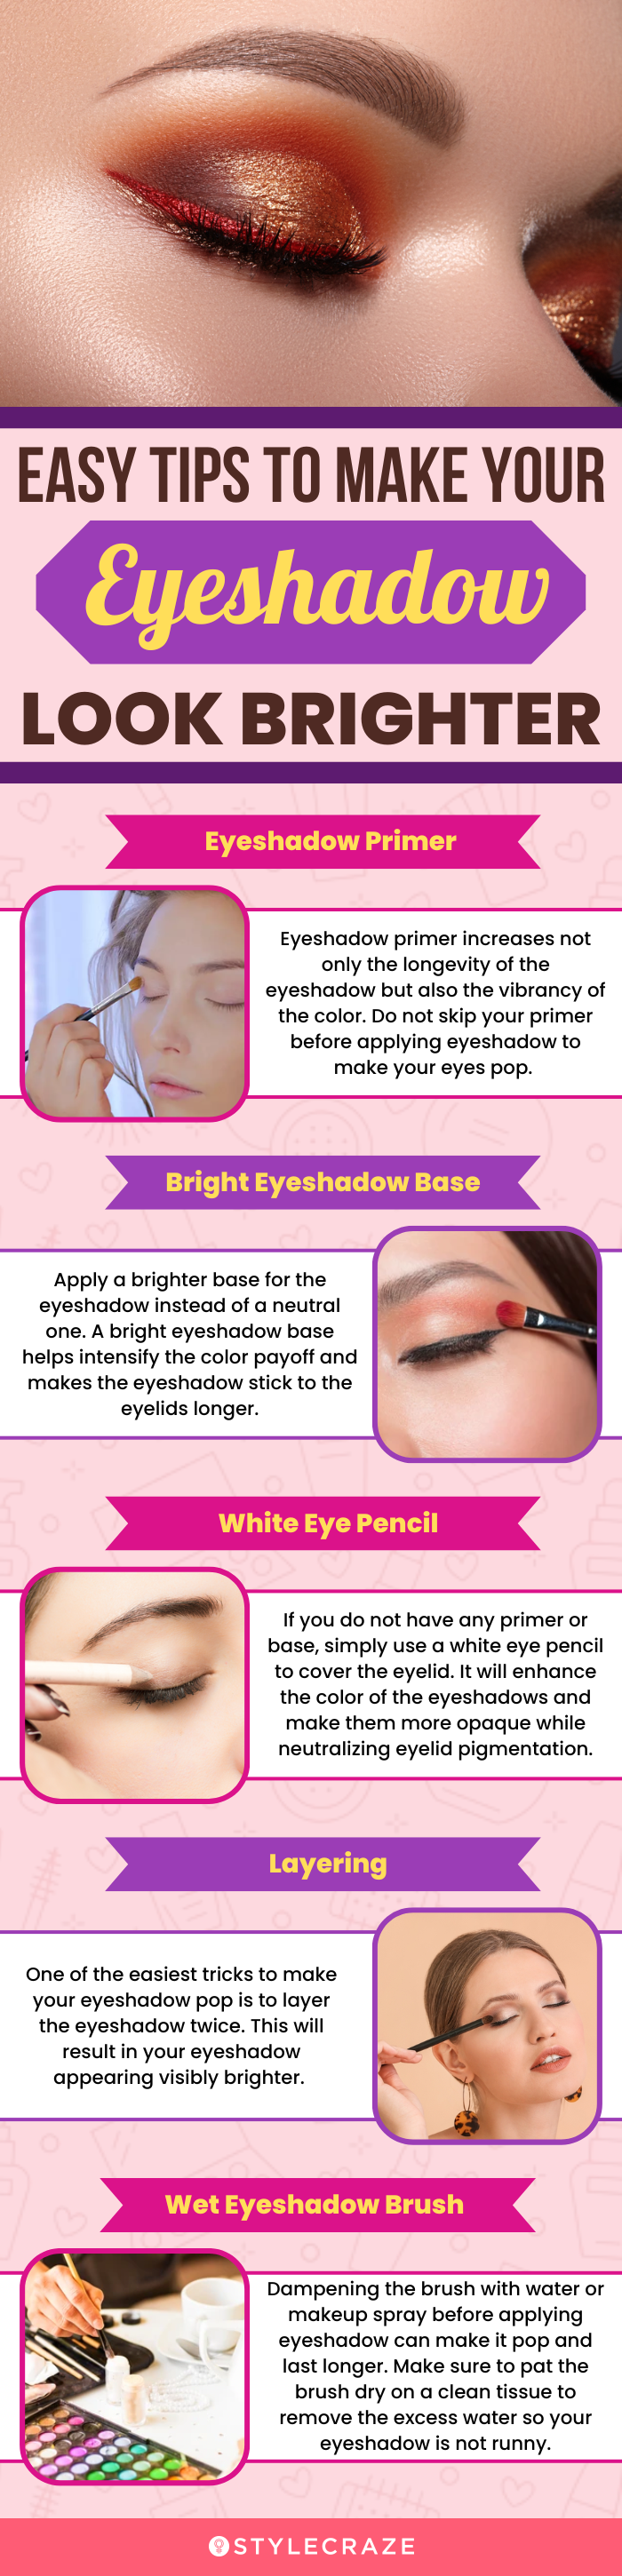 easy tips to make your eyeshadow look brighter (infographic)